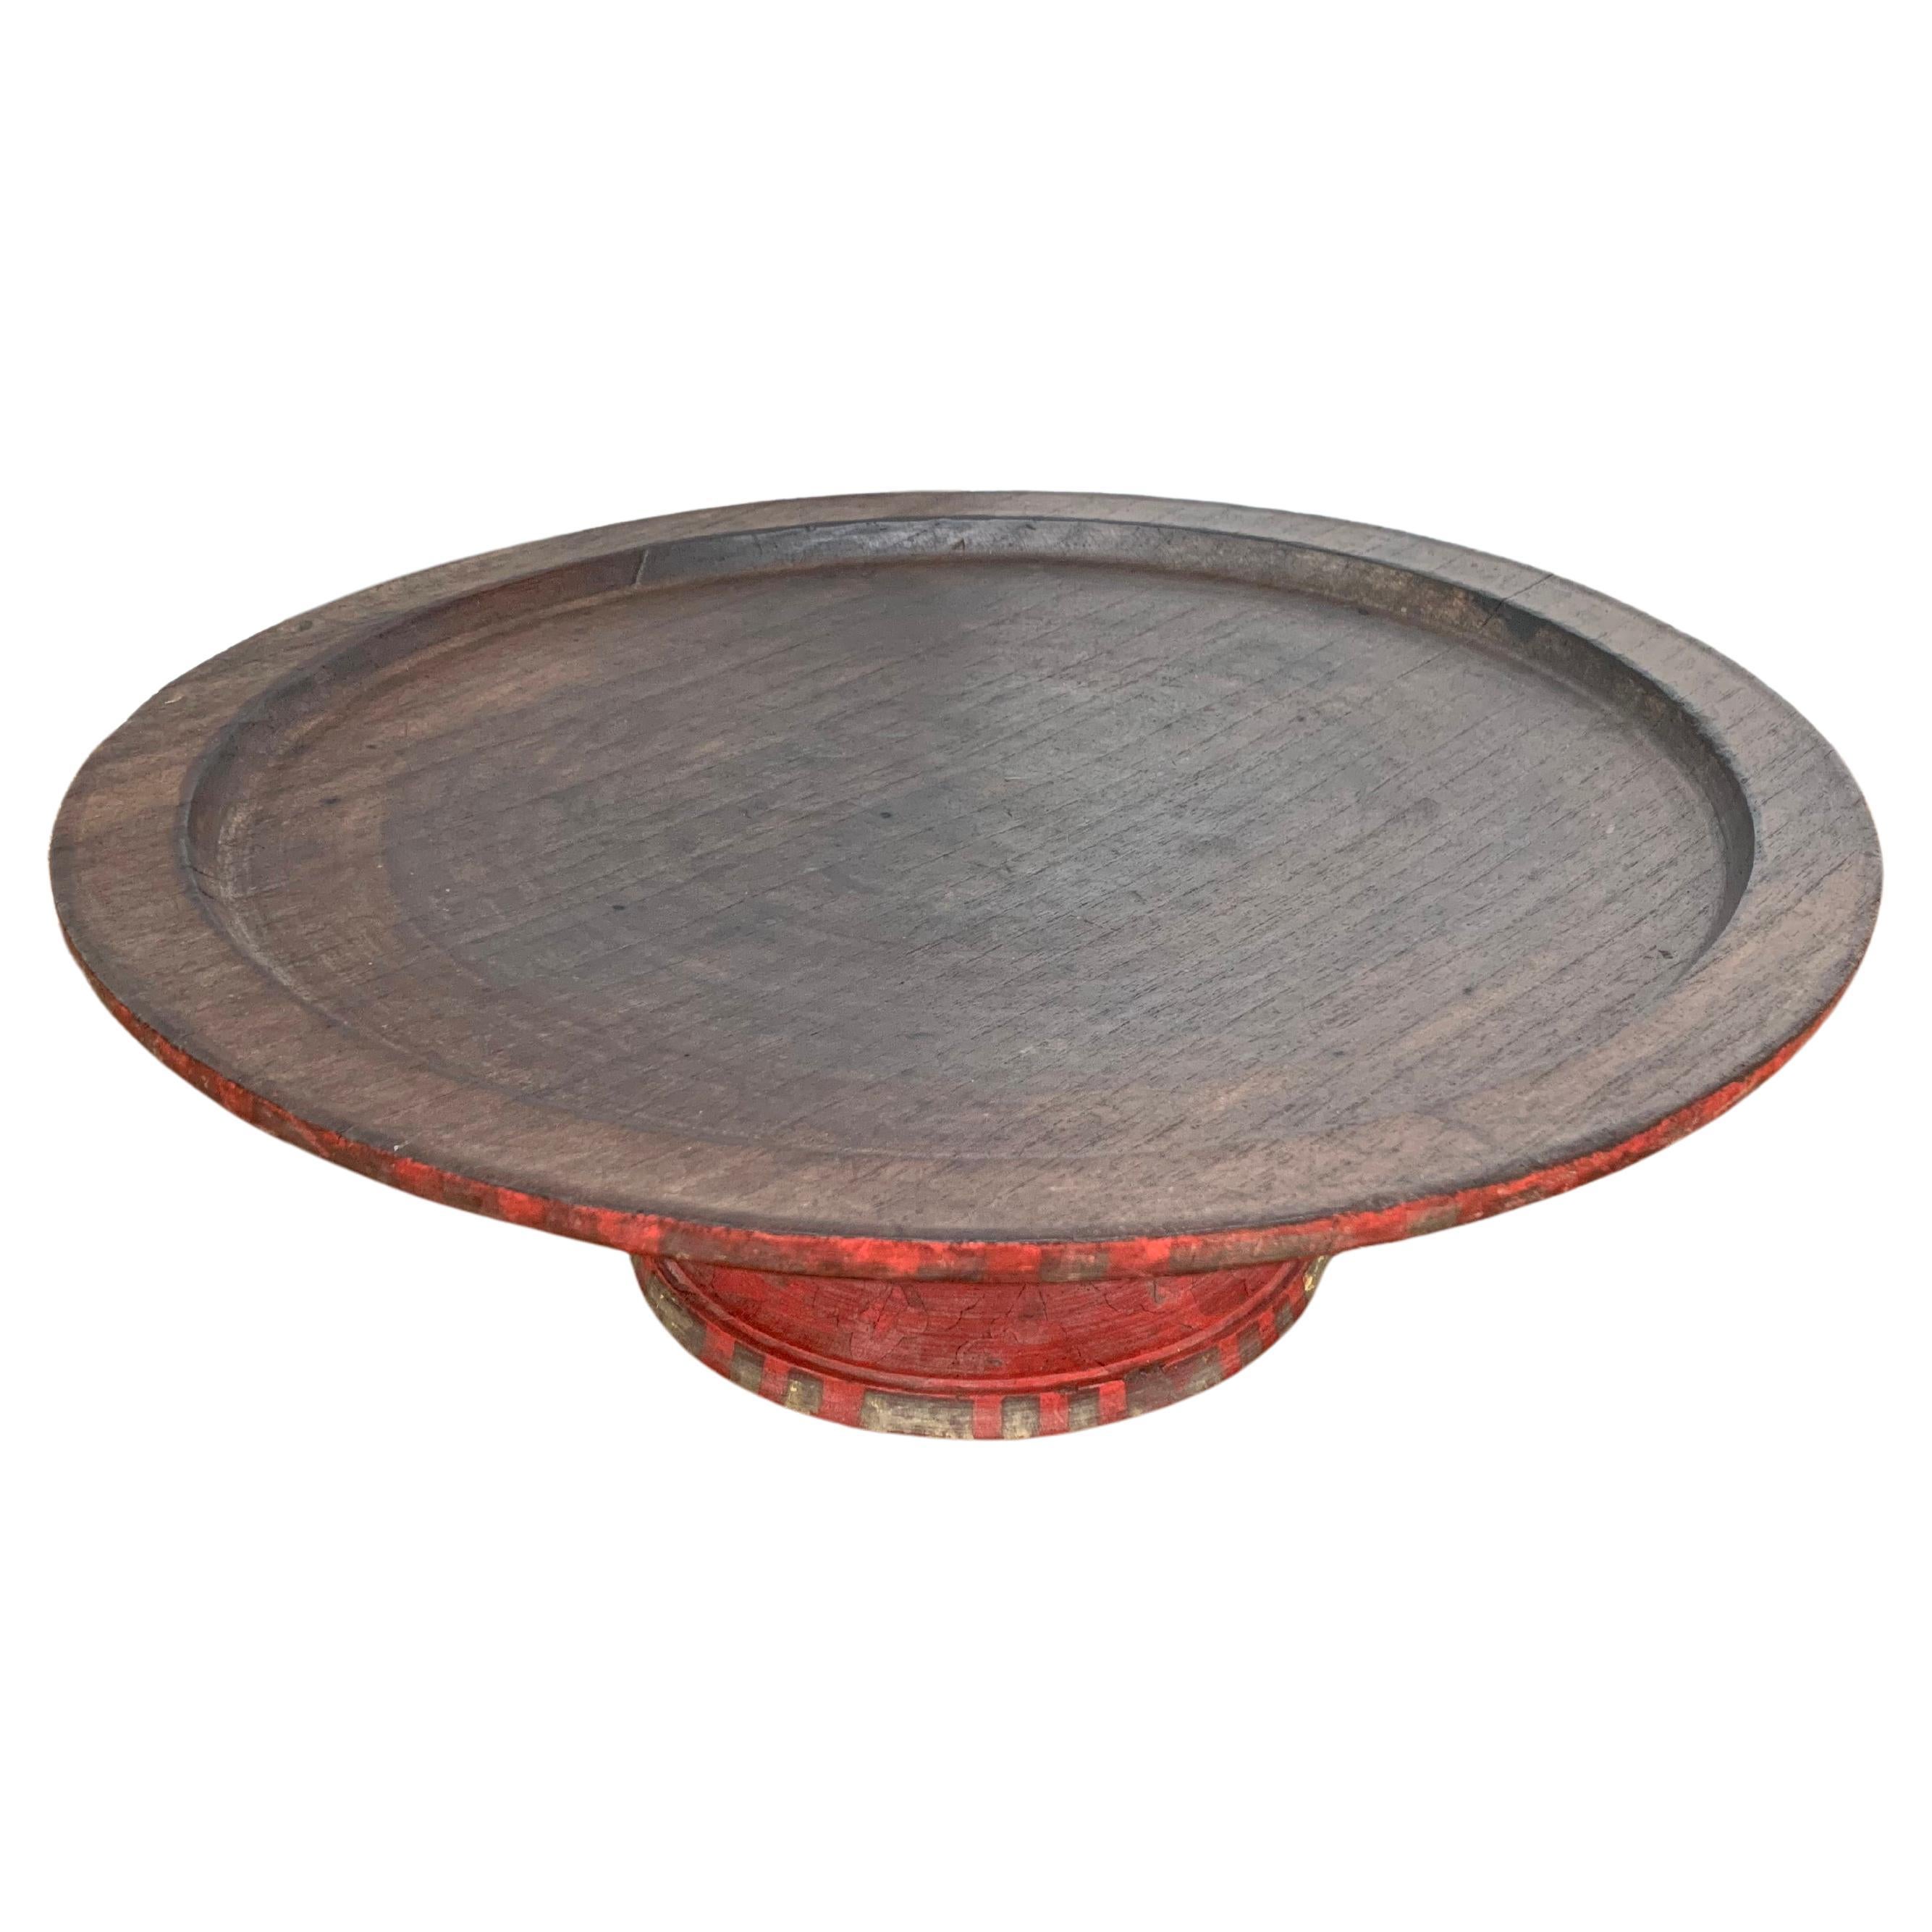 Balinese Temple Offering Tray / Bowl 'Dulang' Floral Motifs & Red Polychrome For Sale